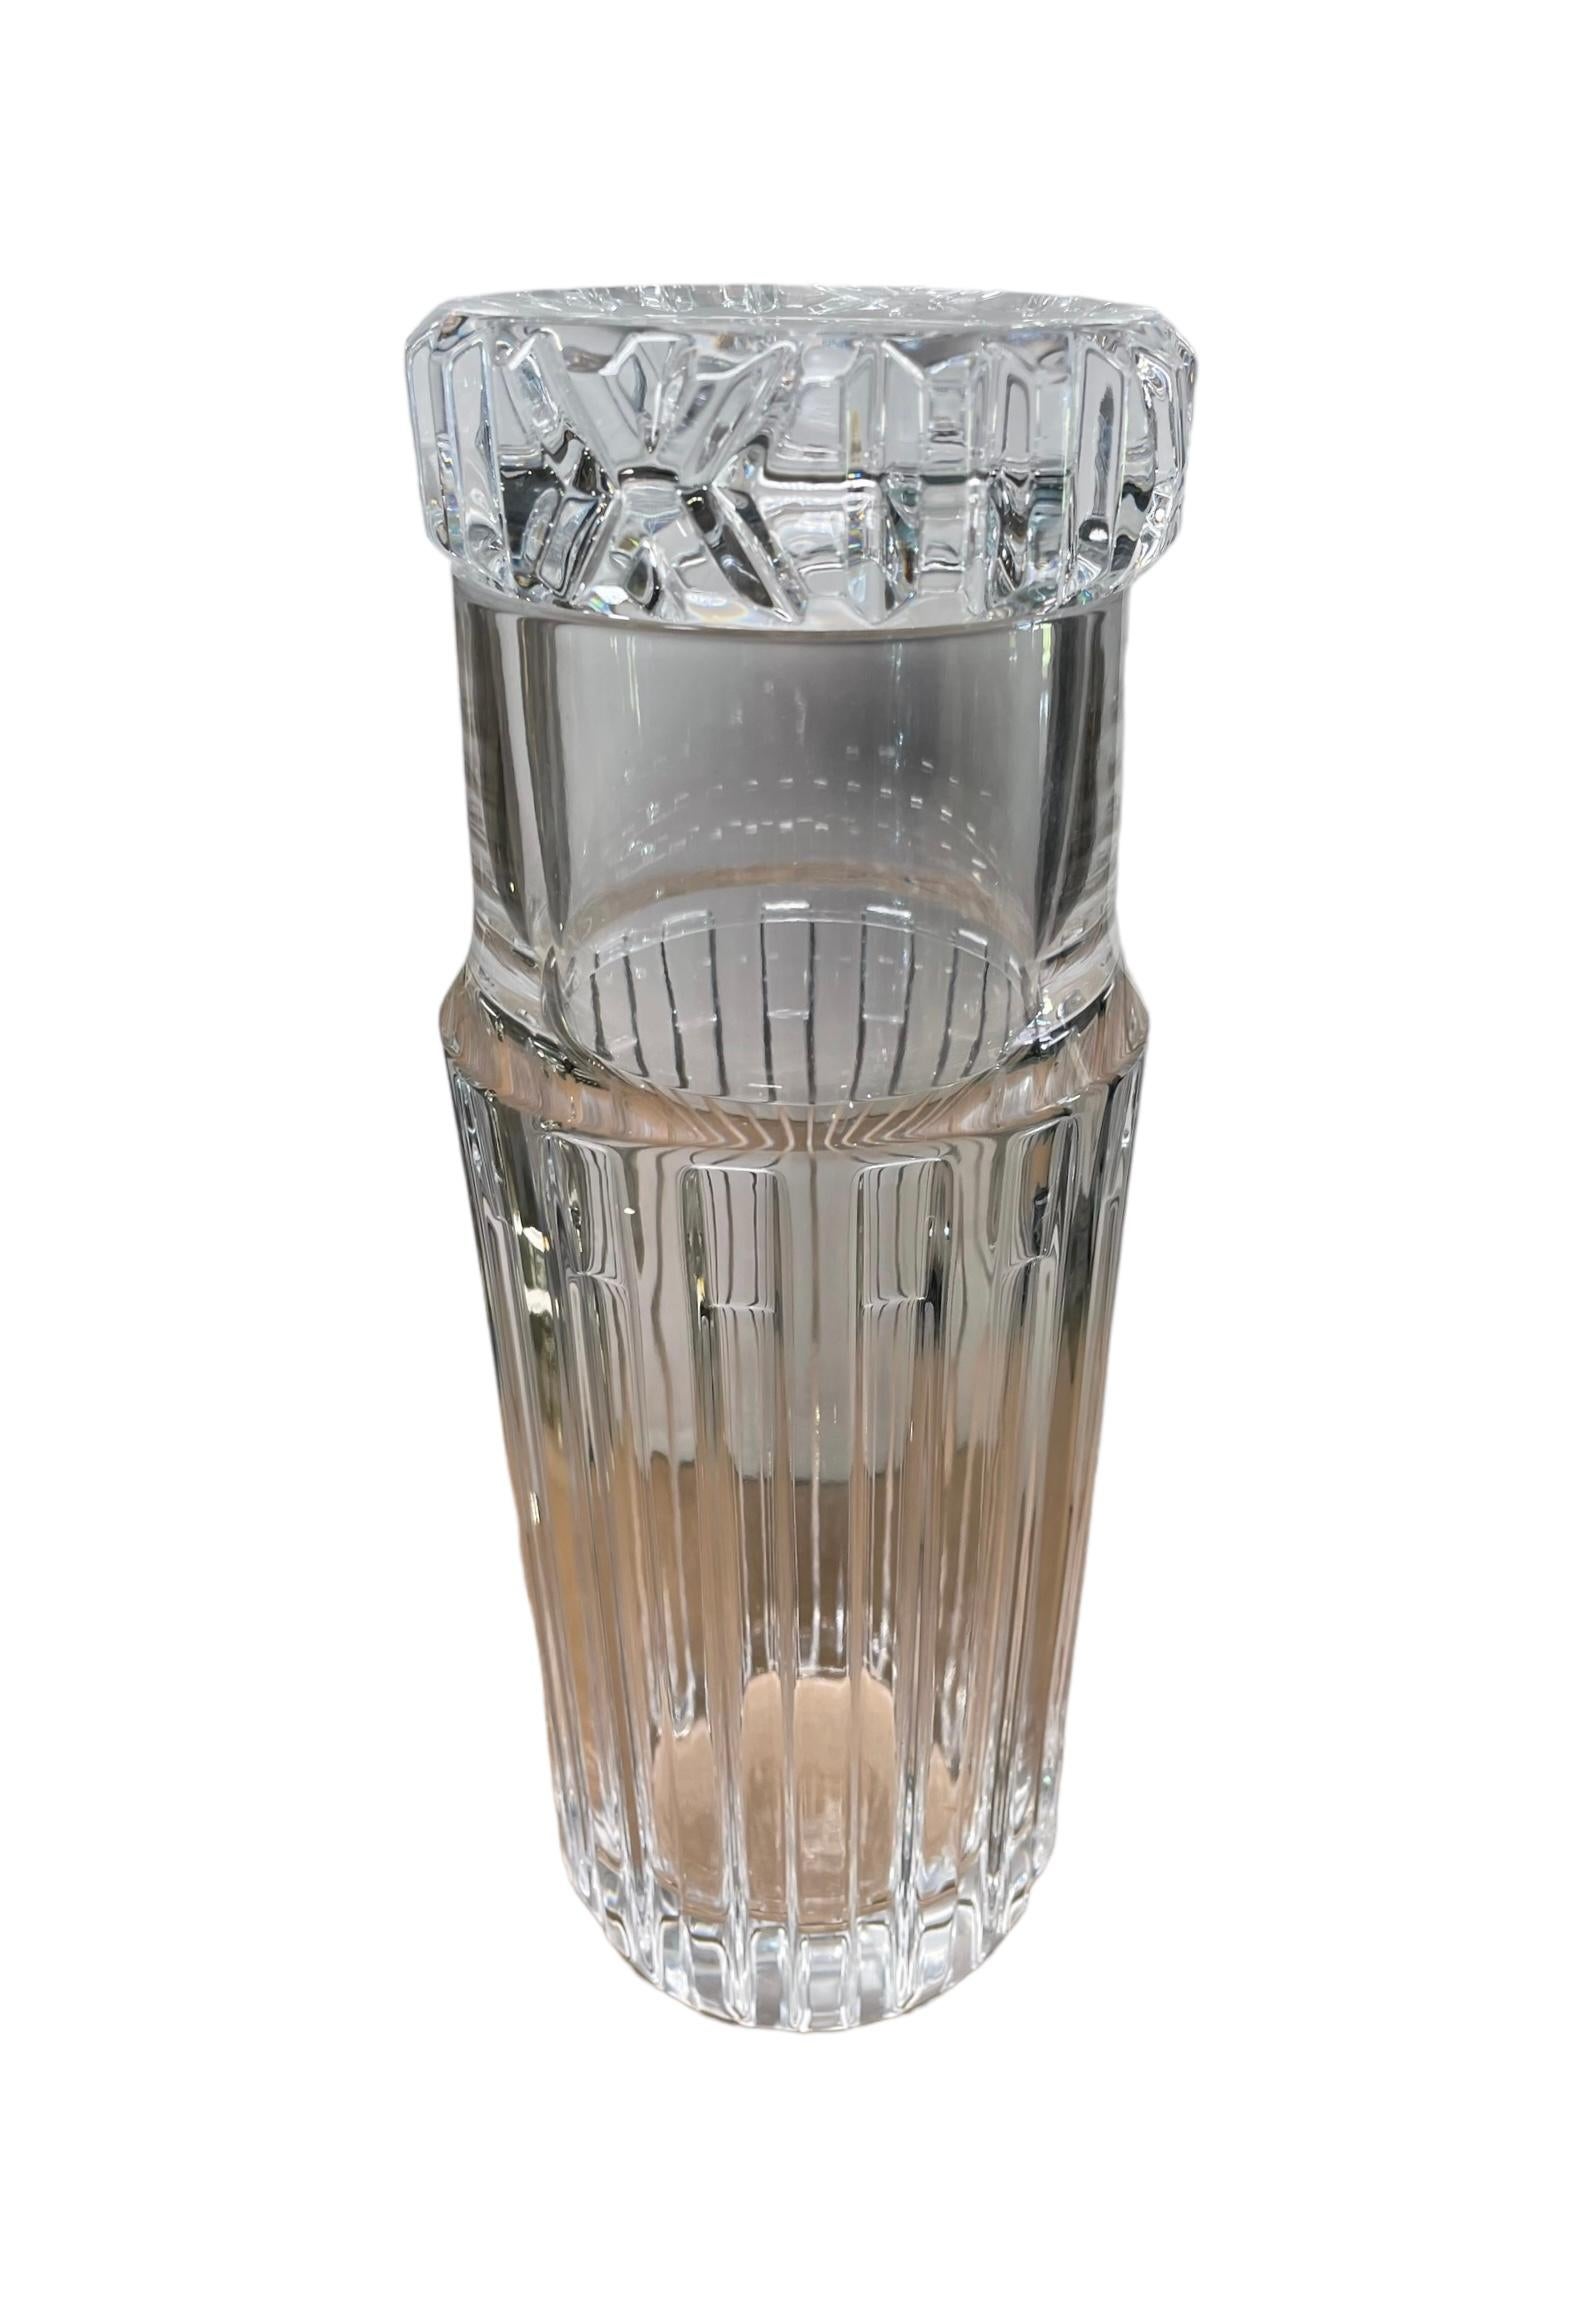 This is a Tiffany & Co “Atlas” Crystal bedside water carafe and glass. It depicts a cylindrical shaped reeded crystal tall and wide container with a glass that serves as a lid. This last one has a wide round base with cut crystal designs.